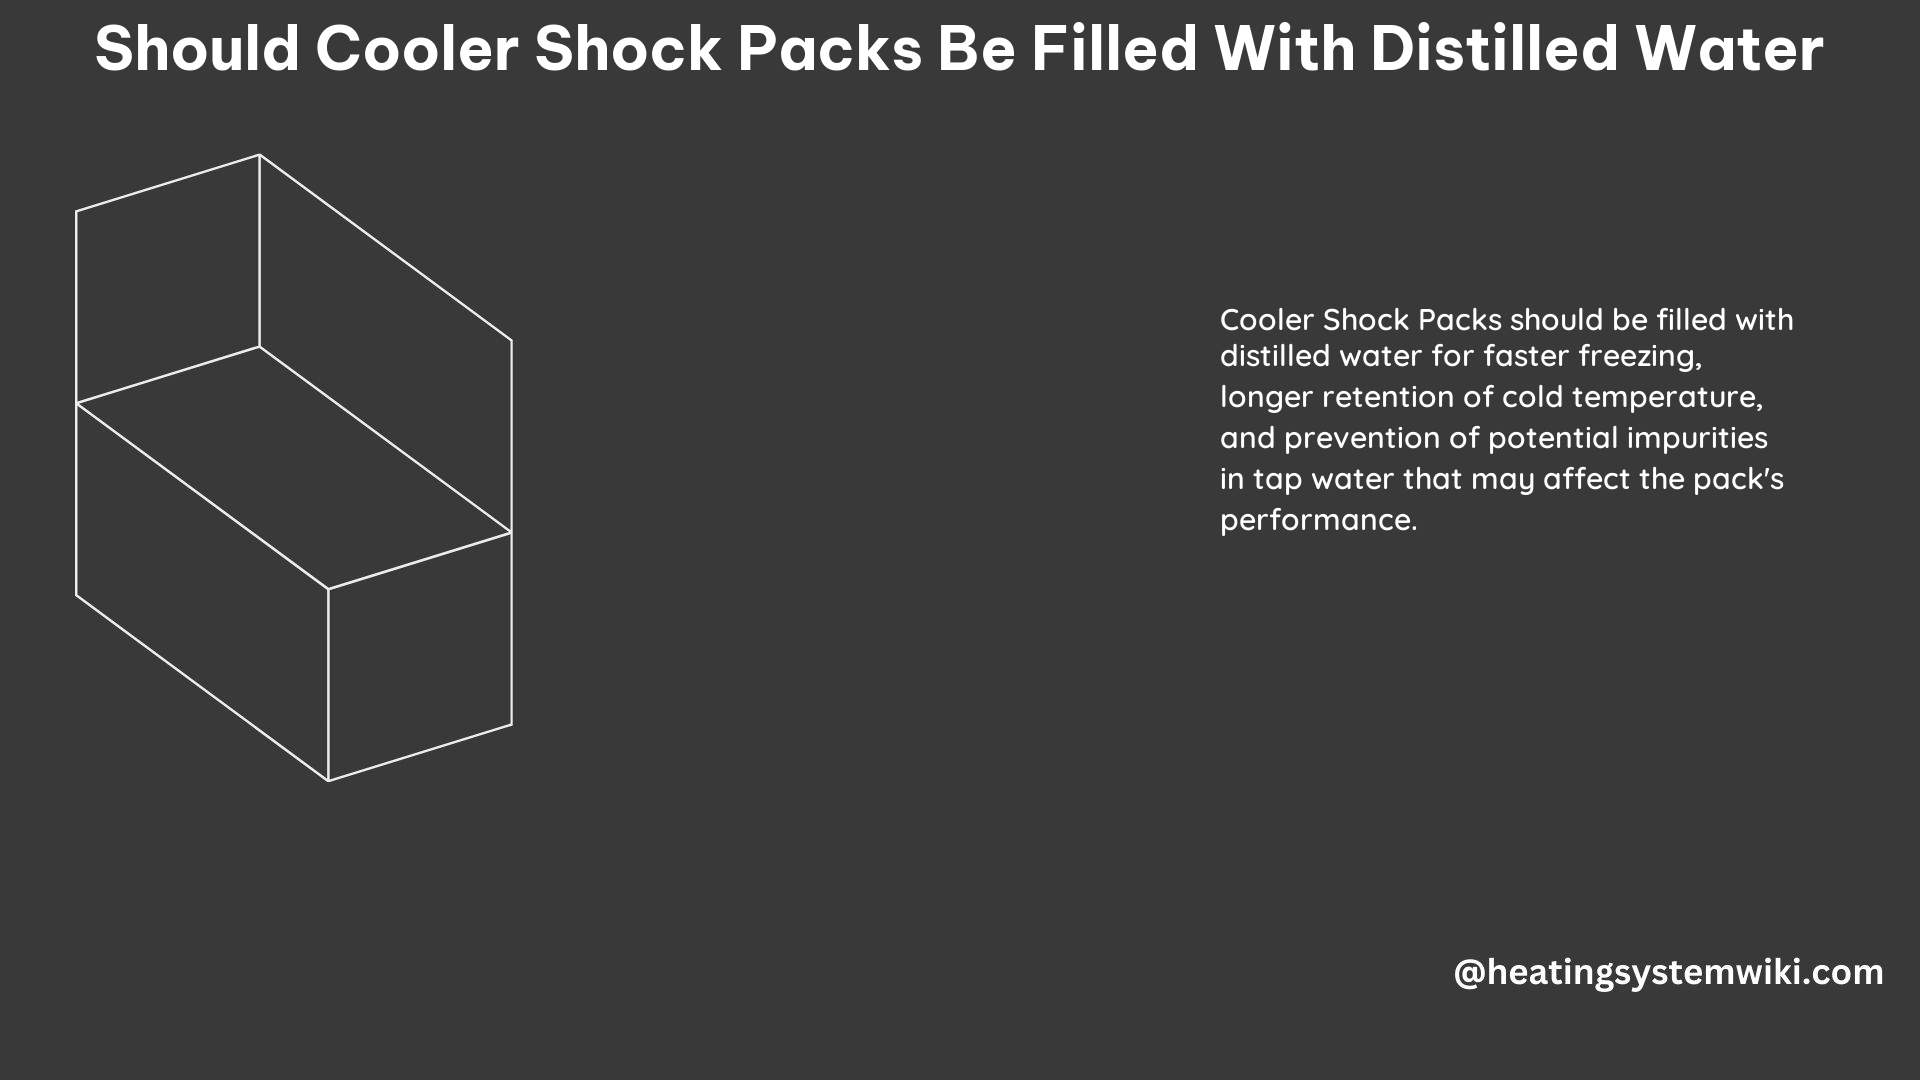 Should Cooler Shock Packs Be Filled With Distilled Water